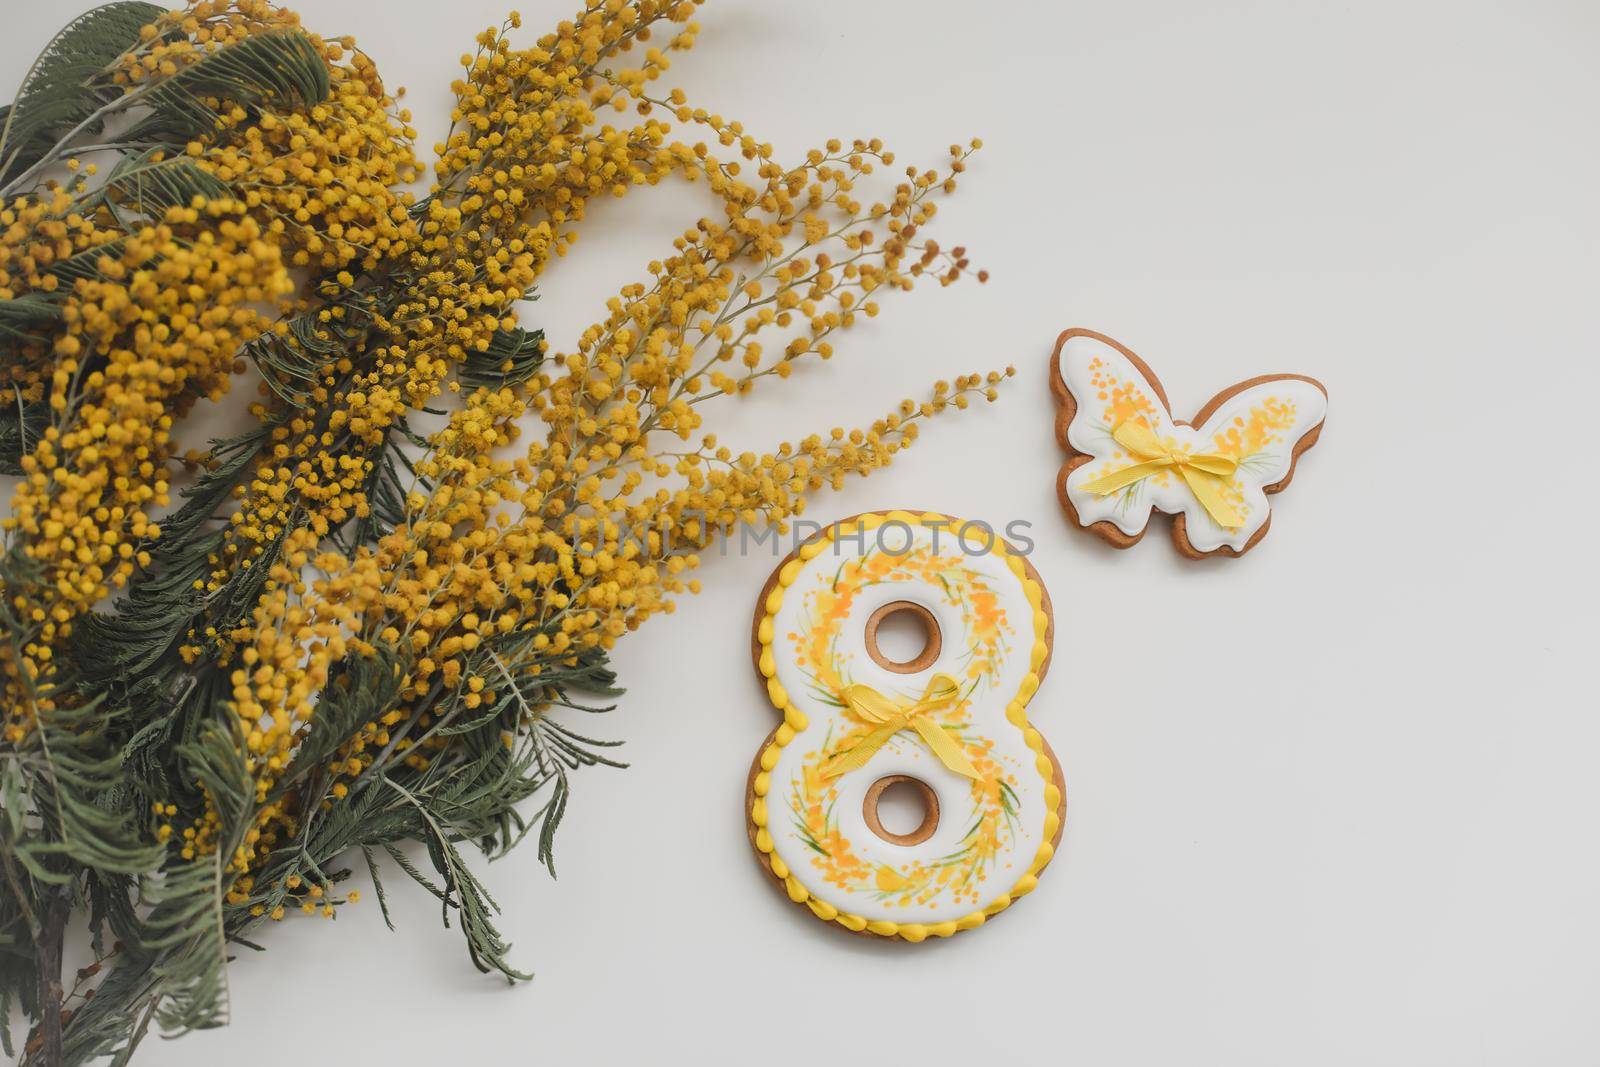 Women's Day, March 8, figure eight, gingerbread, flowers. Space for text. by paralisart